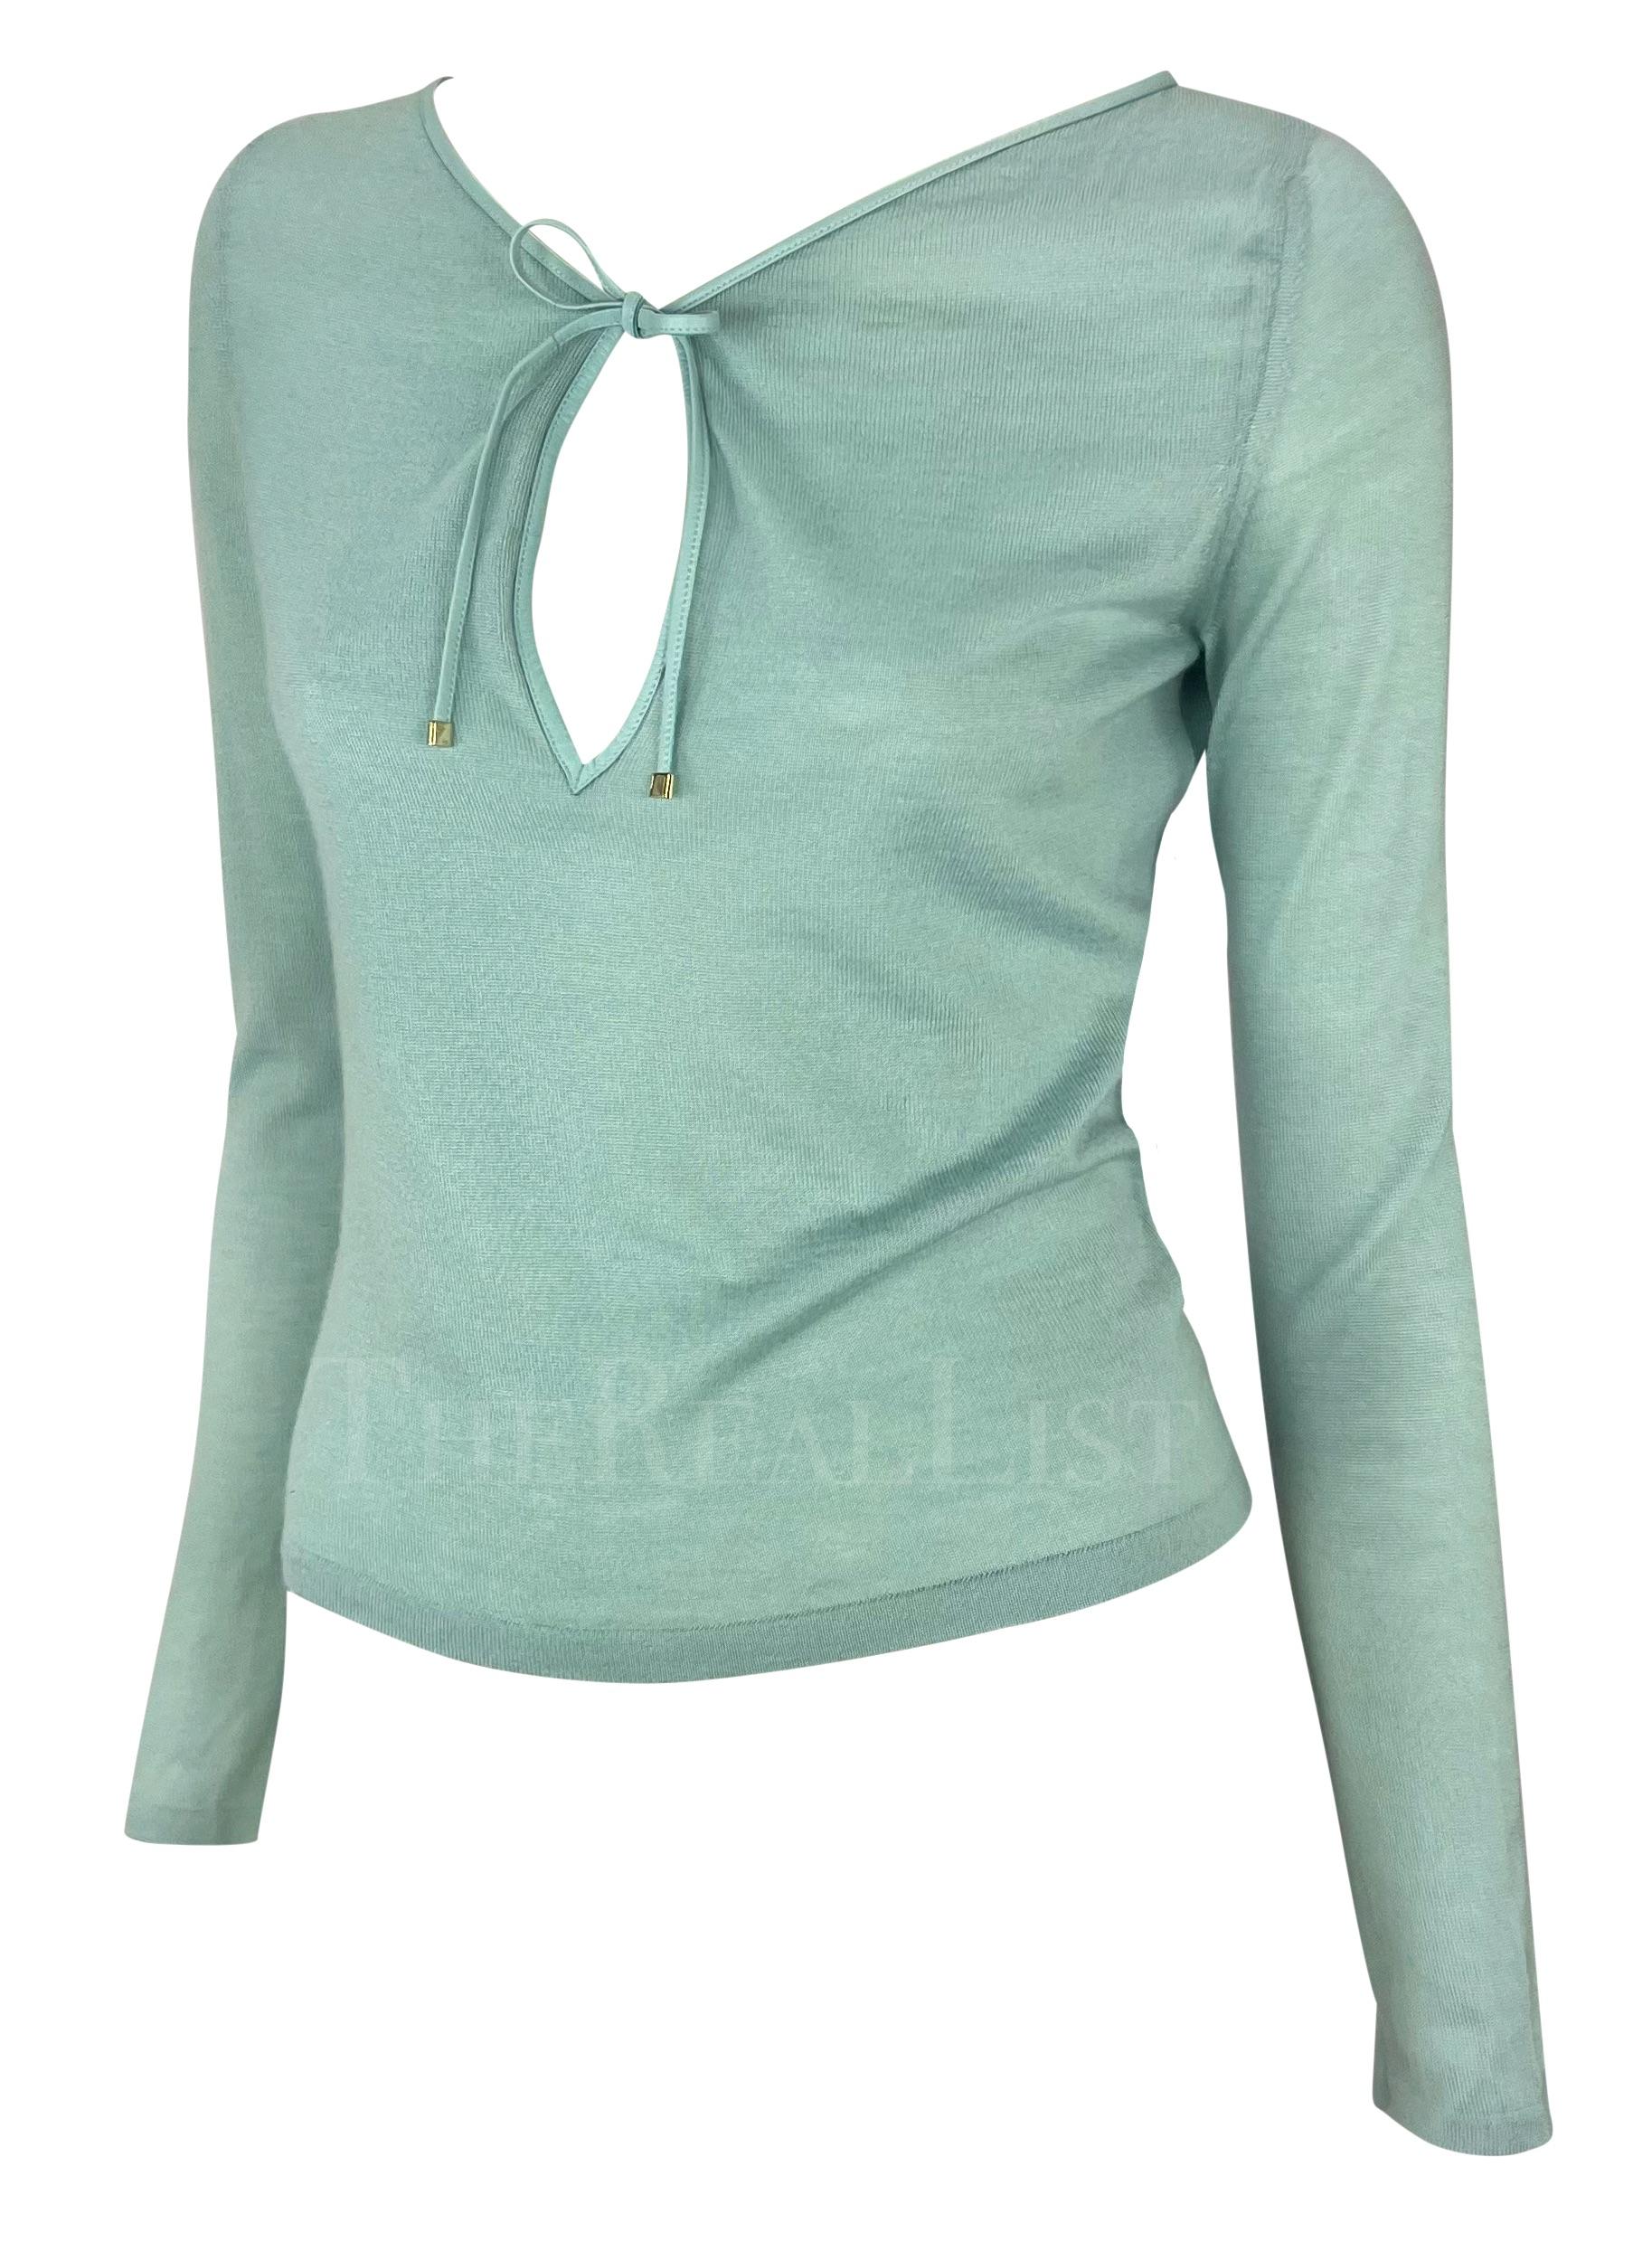 Presenting a fabulous light blue knit cashmere Gucci top, designed by Tom Ford. From the Spring/Summer 2000 collection, this top is constructed entirely of cashmere and features a leather lace detail at the neckline. The top is made complete with an